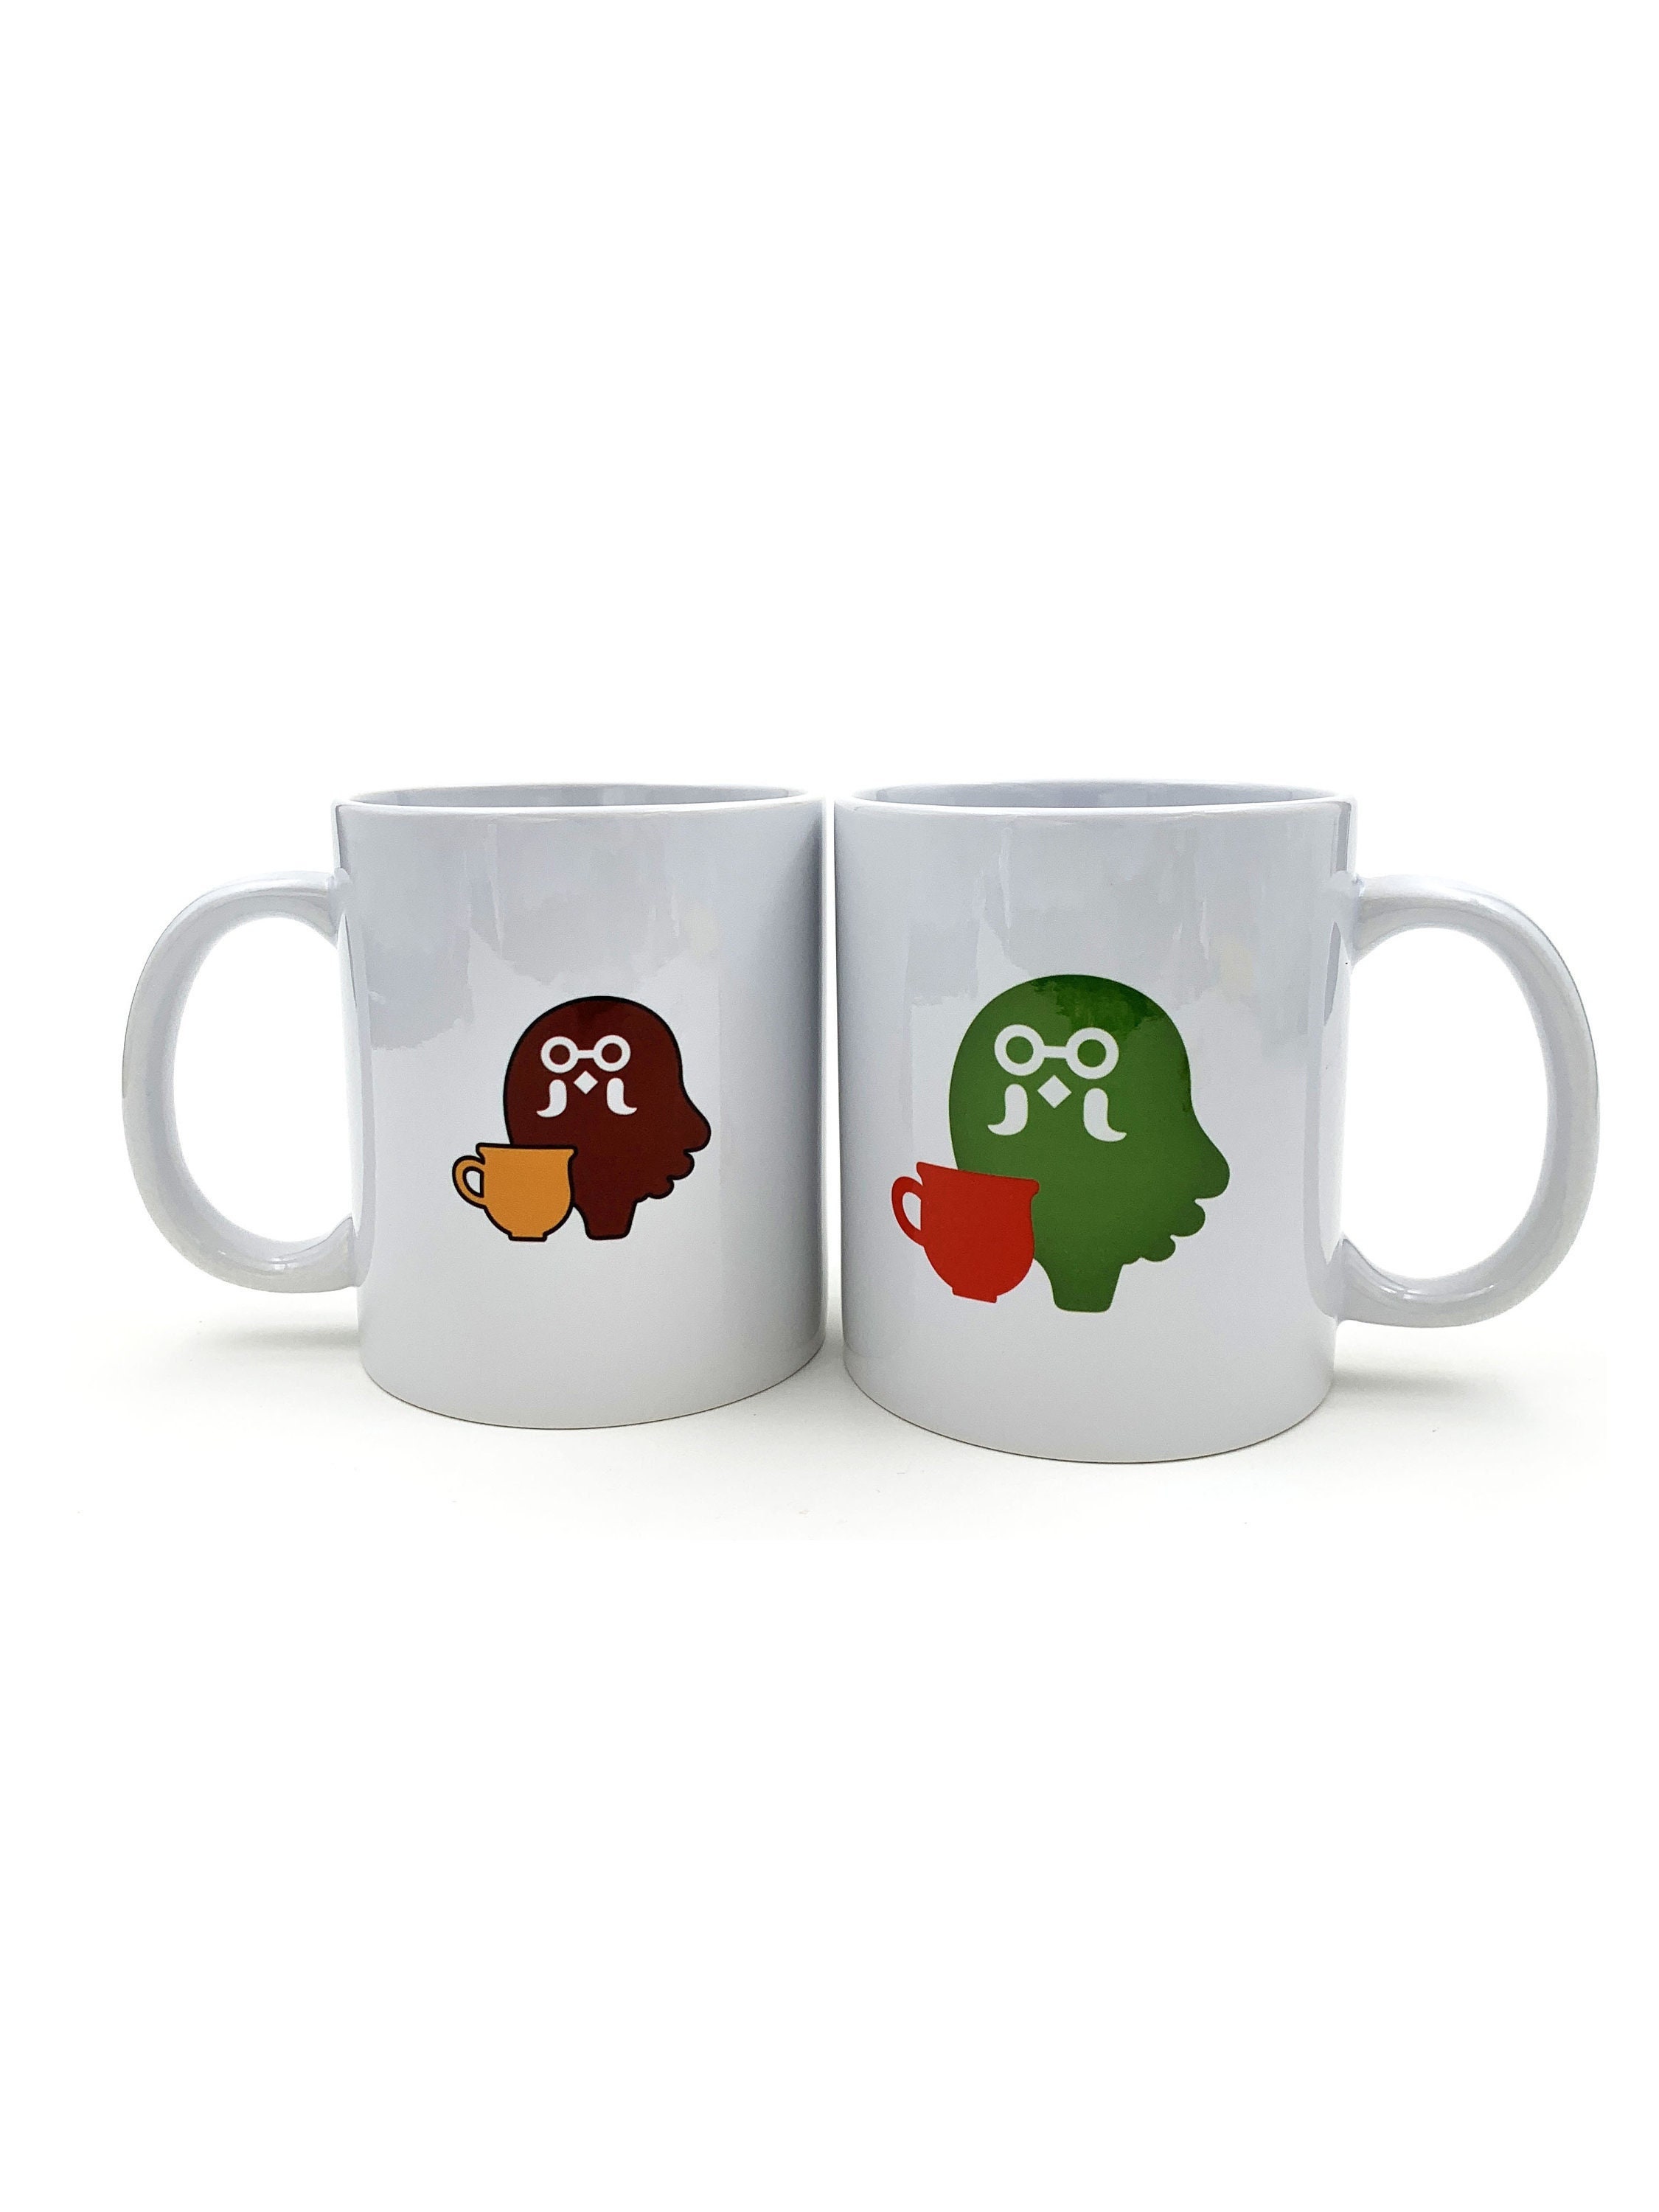 Animal Crossing Insulation Cup Brewster Coffee 350ml 304 Stainless Steel  Anime